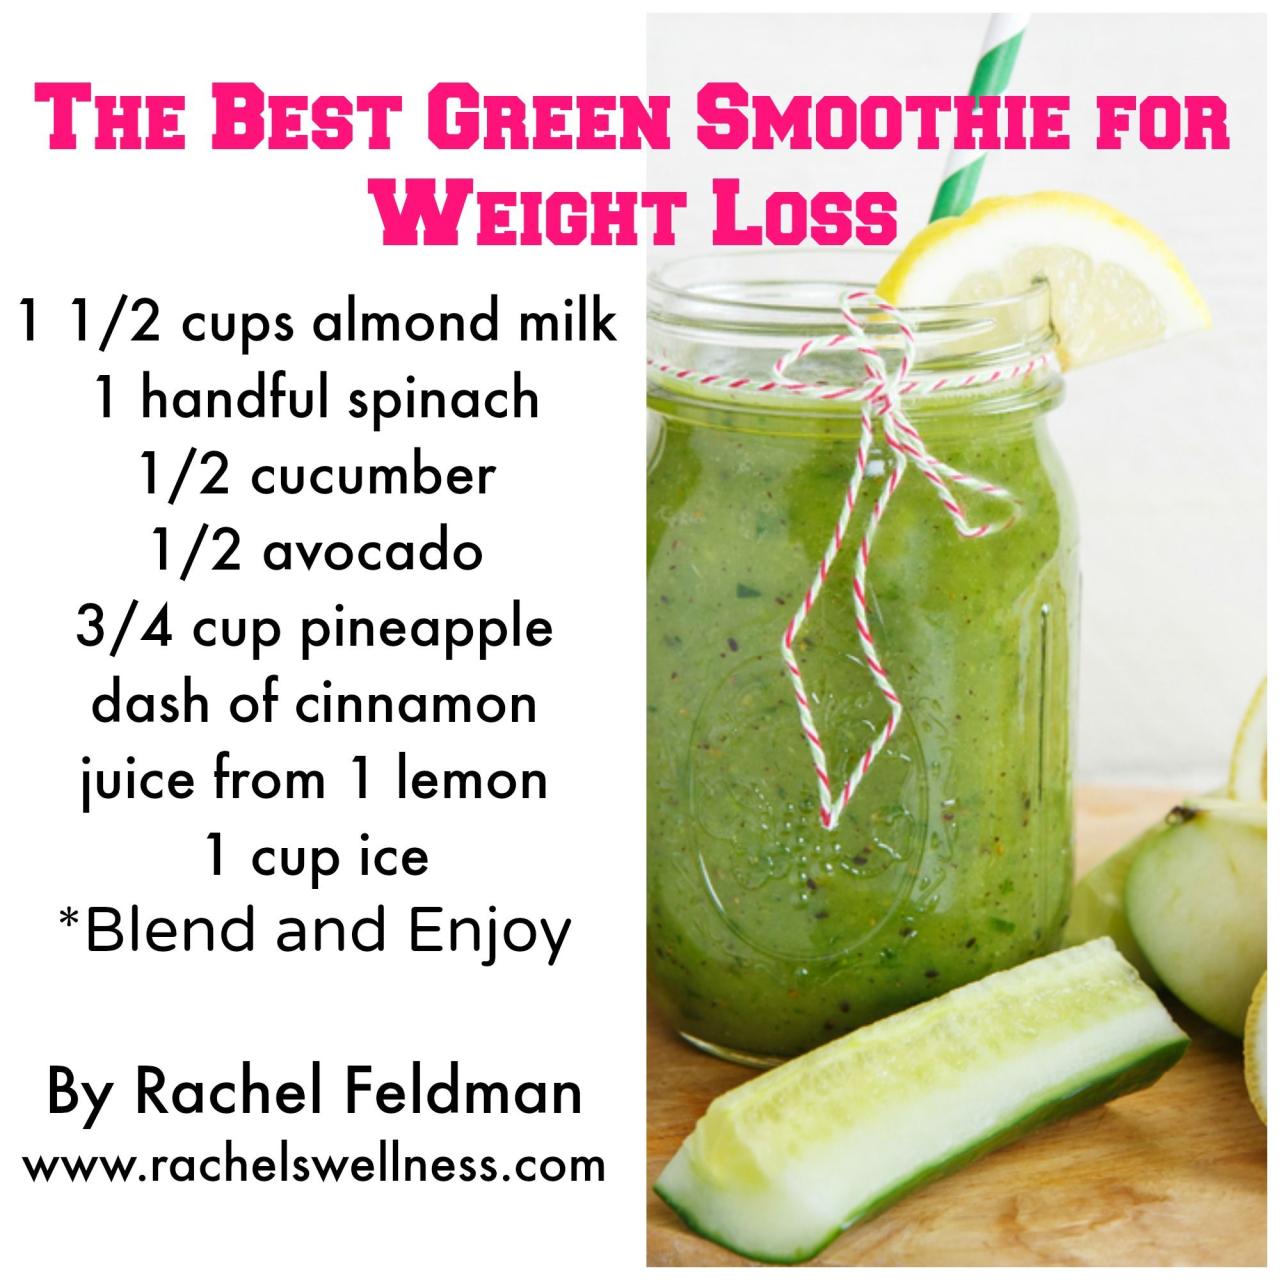 Healthy Breakfast Smoothies For Weight Loss To Buy